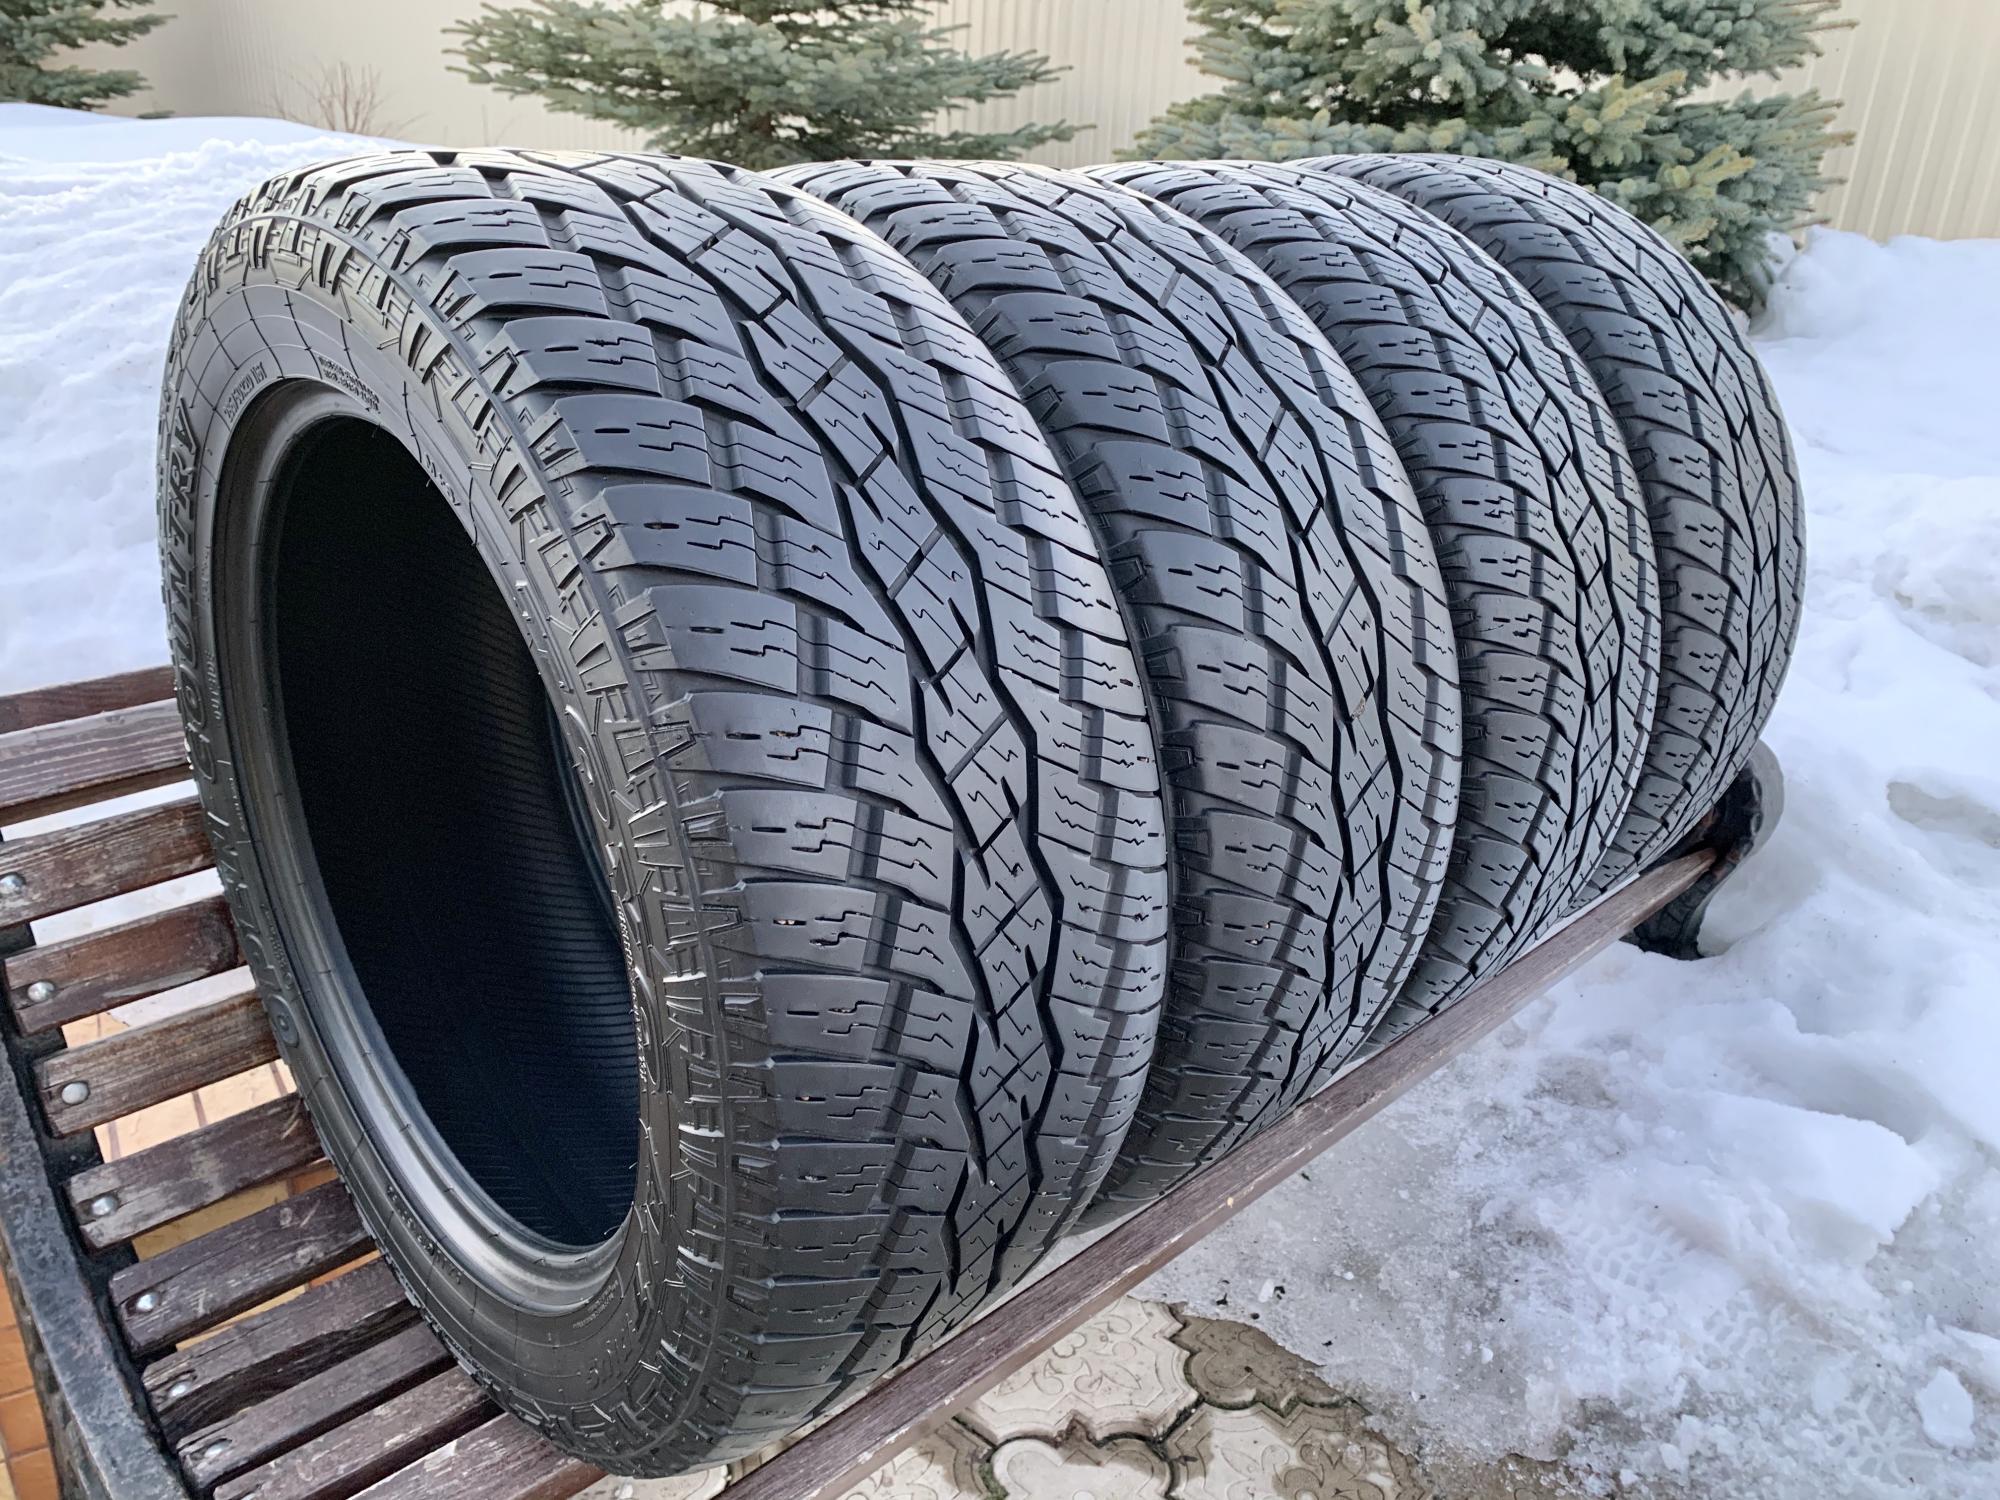 285 50 r20 лето купить. Toyo open Country a/t Plus 285/50 r20. Toyo open Country a20 285/50 r20.